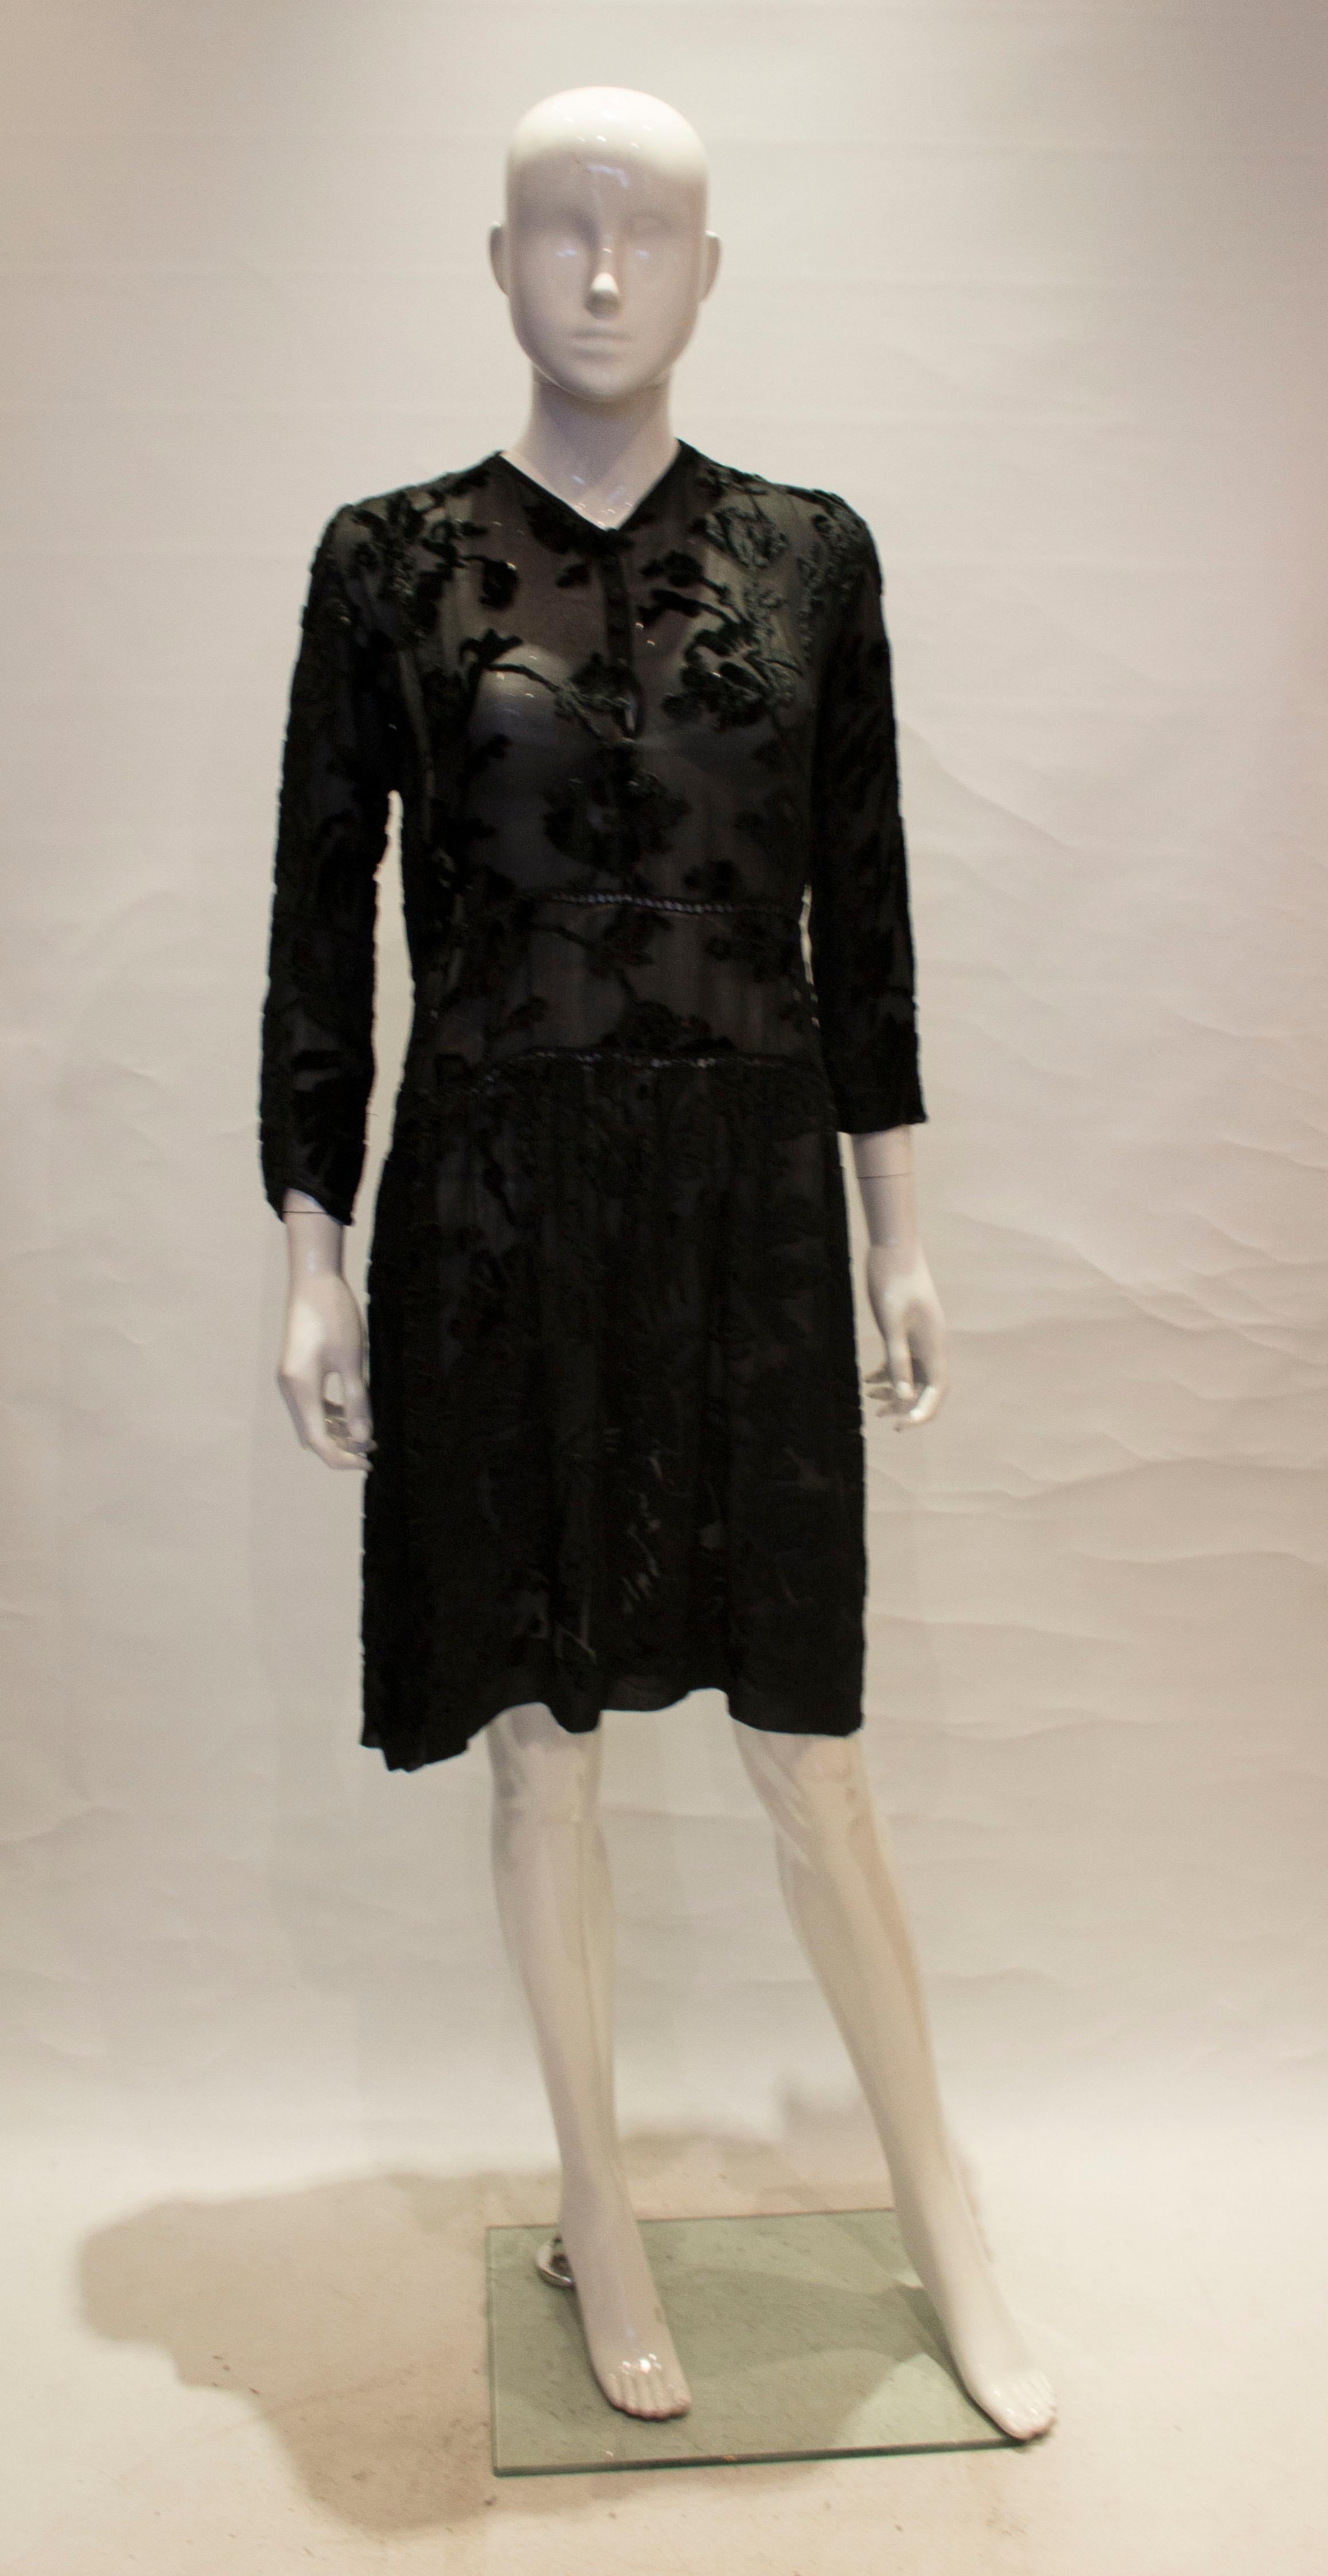 A lovely 1920s - 1930s black devore dress in a floral design, popper up the front,

measurements taken flat in inches 

bust - 18
waist - 17 
length - 40 